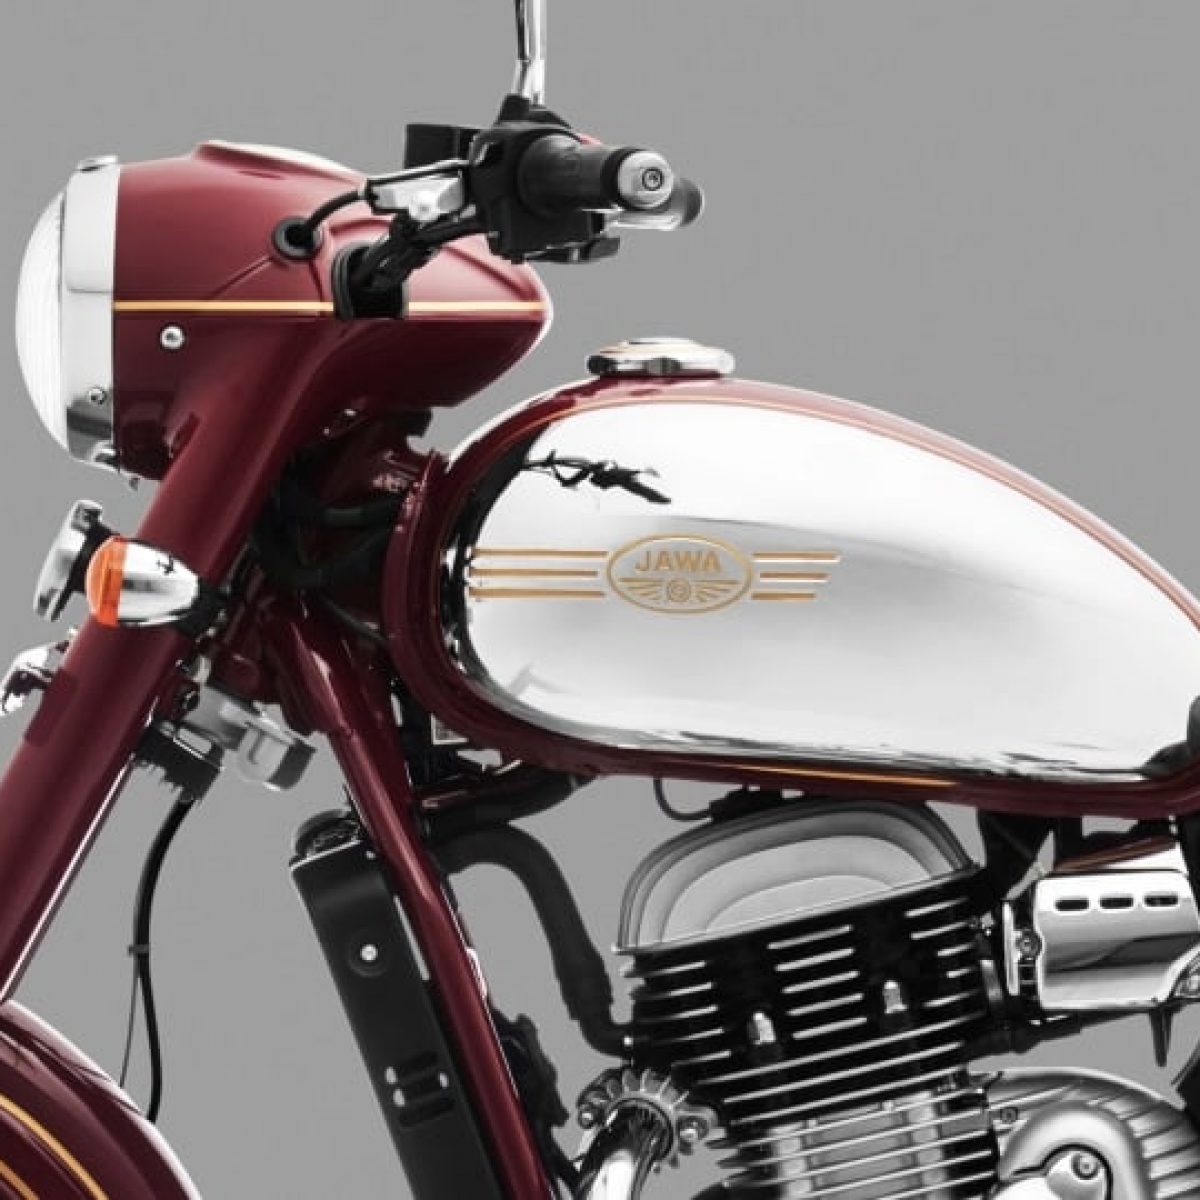 Jawa Motorcycles India Dealership Details Are Here